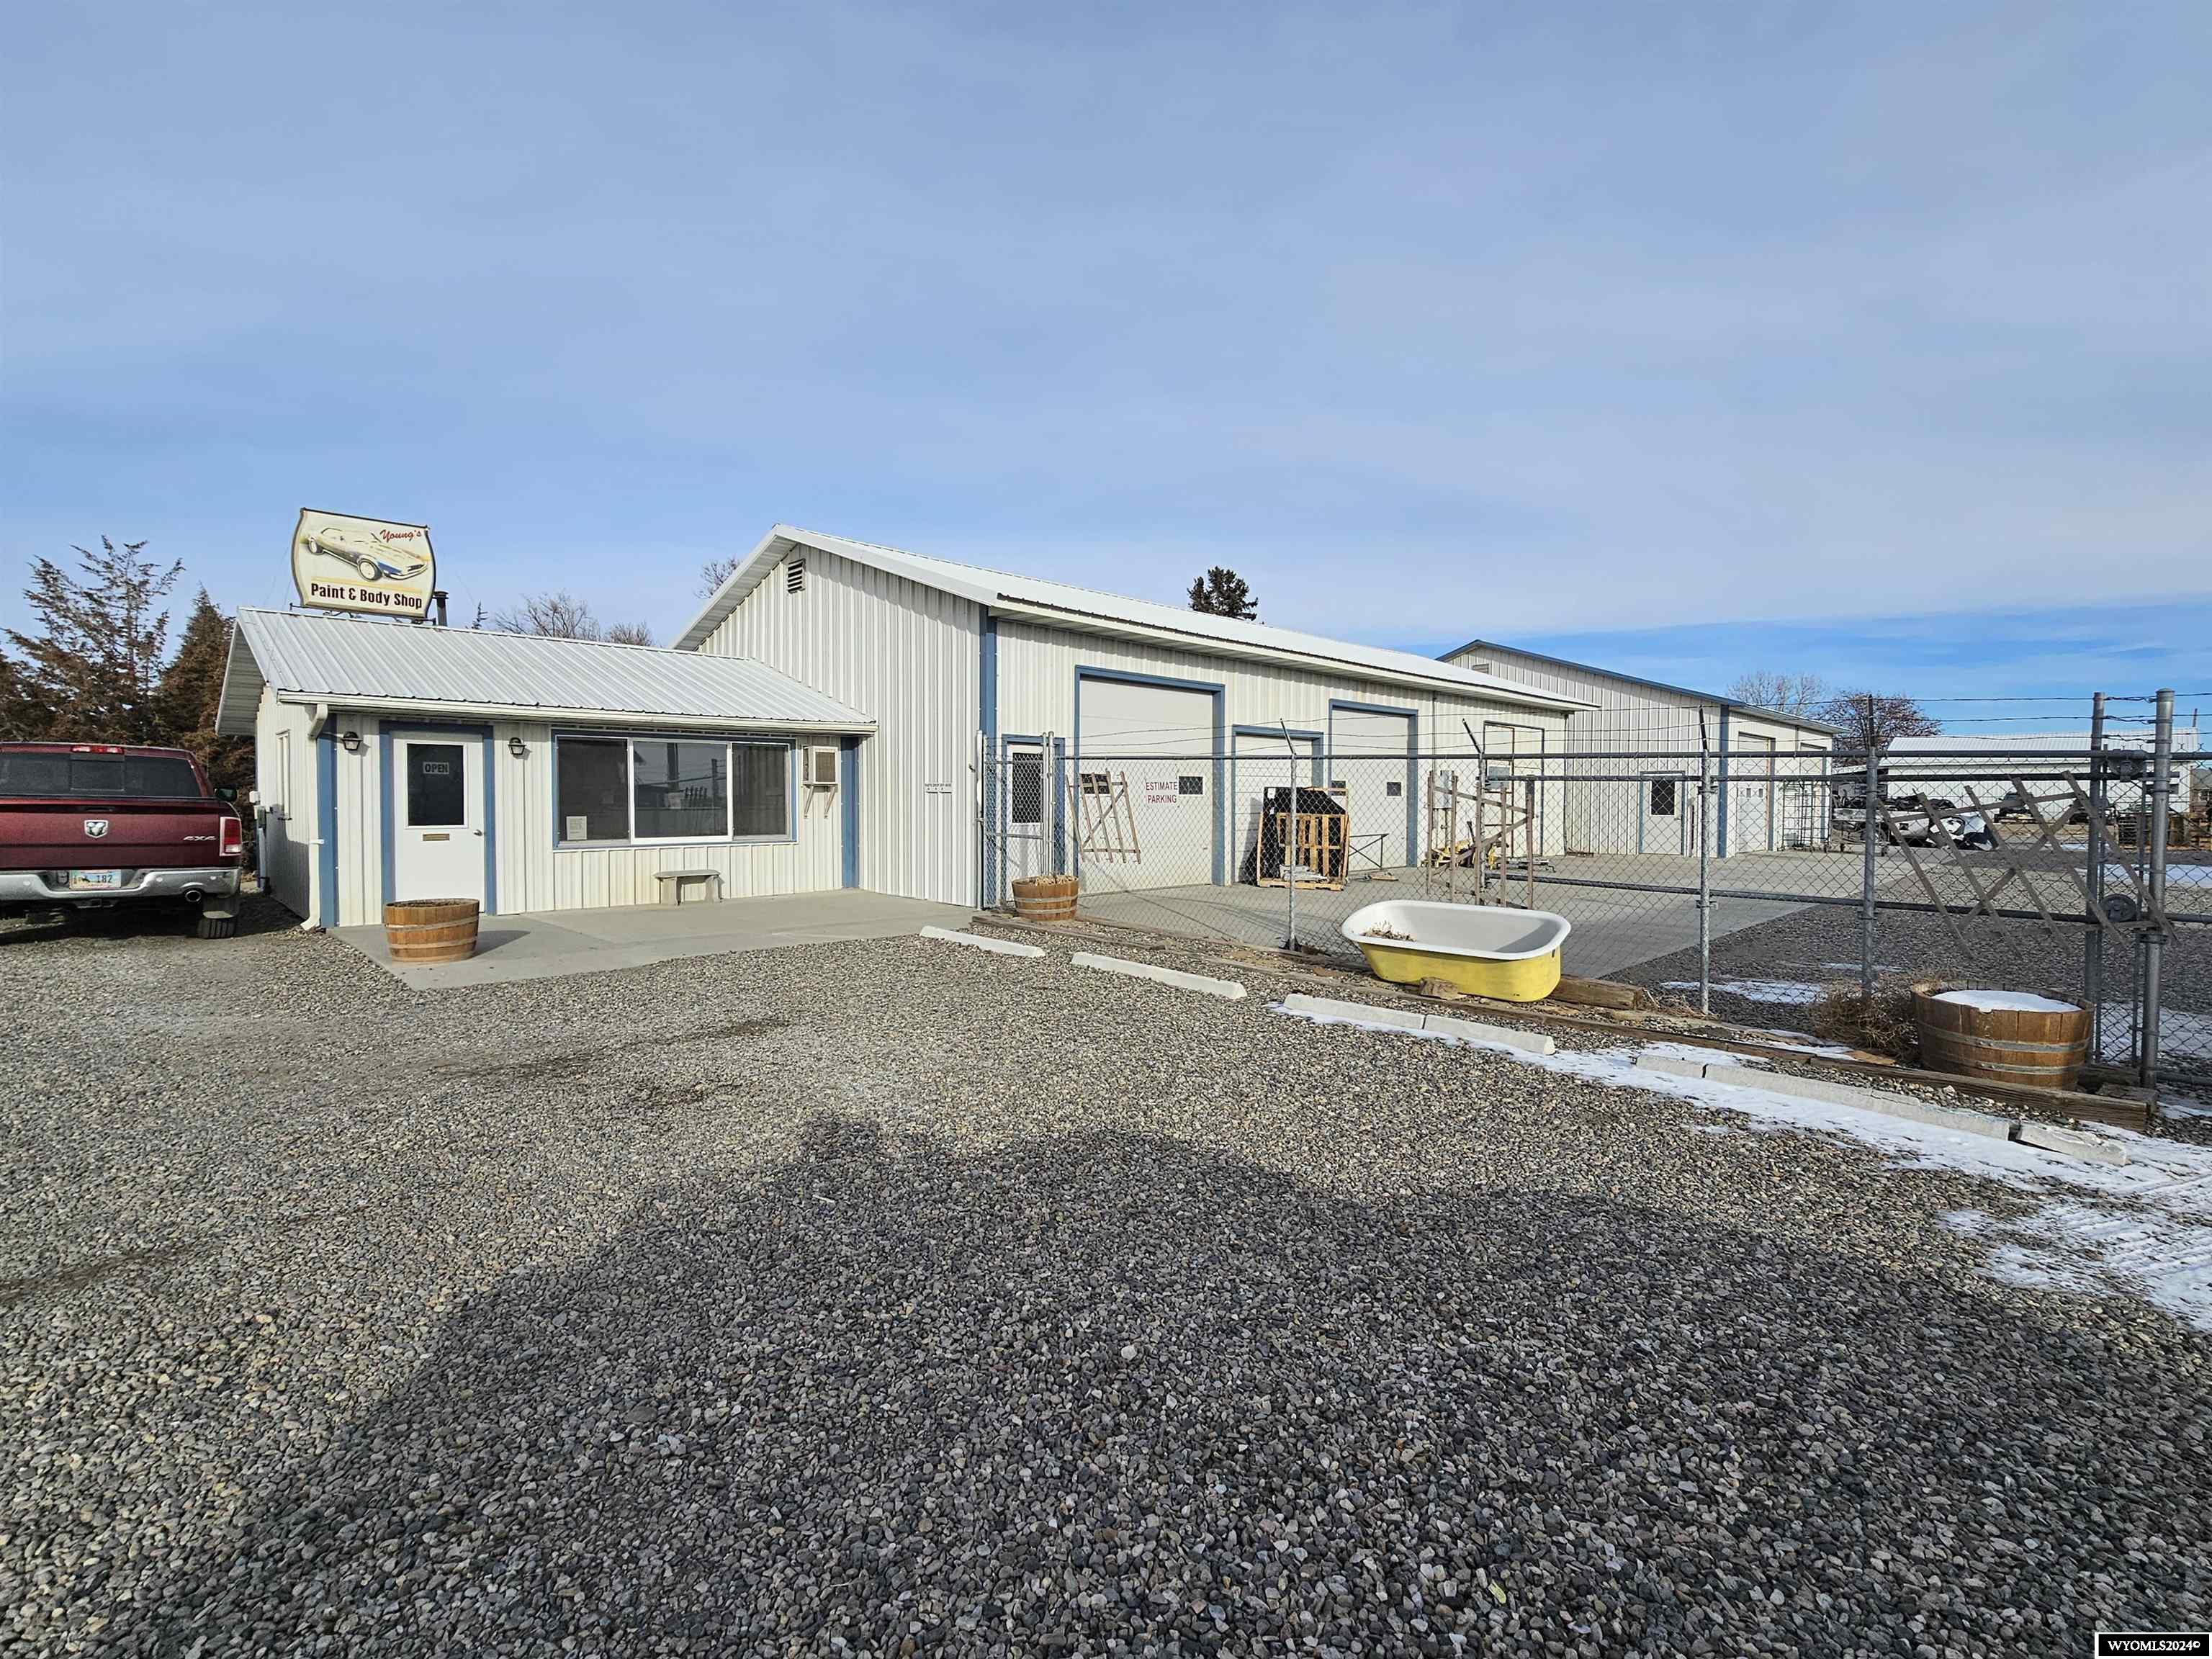 Property is currently used as a body & paint shops. 2 Steel Constructed Commercial Buildings (office area is frame) + 2 Frame Buildings,.  Building #1 has approximately 2270 Sq Ft; included in building is 400 sq ft office space, break room, 1/2 bath.  Shop has 1800 Sq Ft with 3 overhead doors, LED lighting, 3 storage areas and wash bay.  Shop heated with infrared heaters & one bay has air purifier.  70 sq ft attached storage. Building#2 has approximately 1600 Sq Ft with 2 overhead doors. Building #3 is the original south school house in Worland with 760 sq ft being used for storage.Building #4 was the 1st general store in Worland with 624 sq ft being used for storage.  The property may be purchased with all the body and paint inventory & equipment including a paint mixing booth and paint booth for $350,000